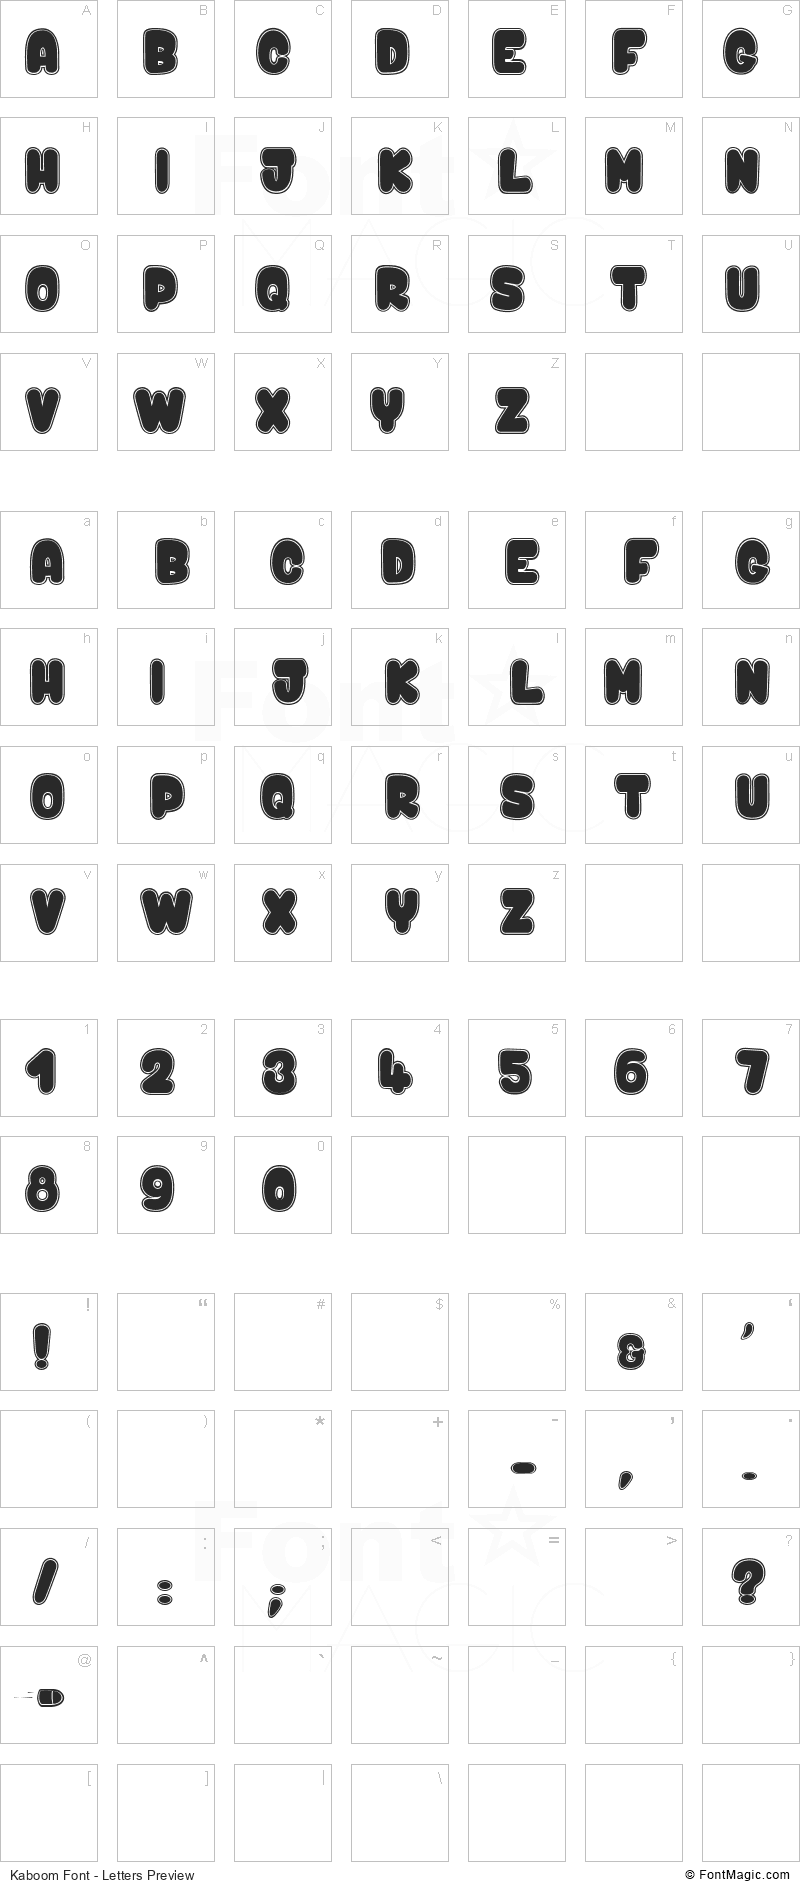 Kaboom Font - All Latters Preview Chart